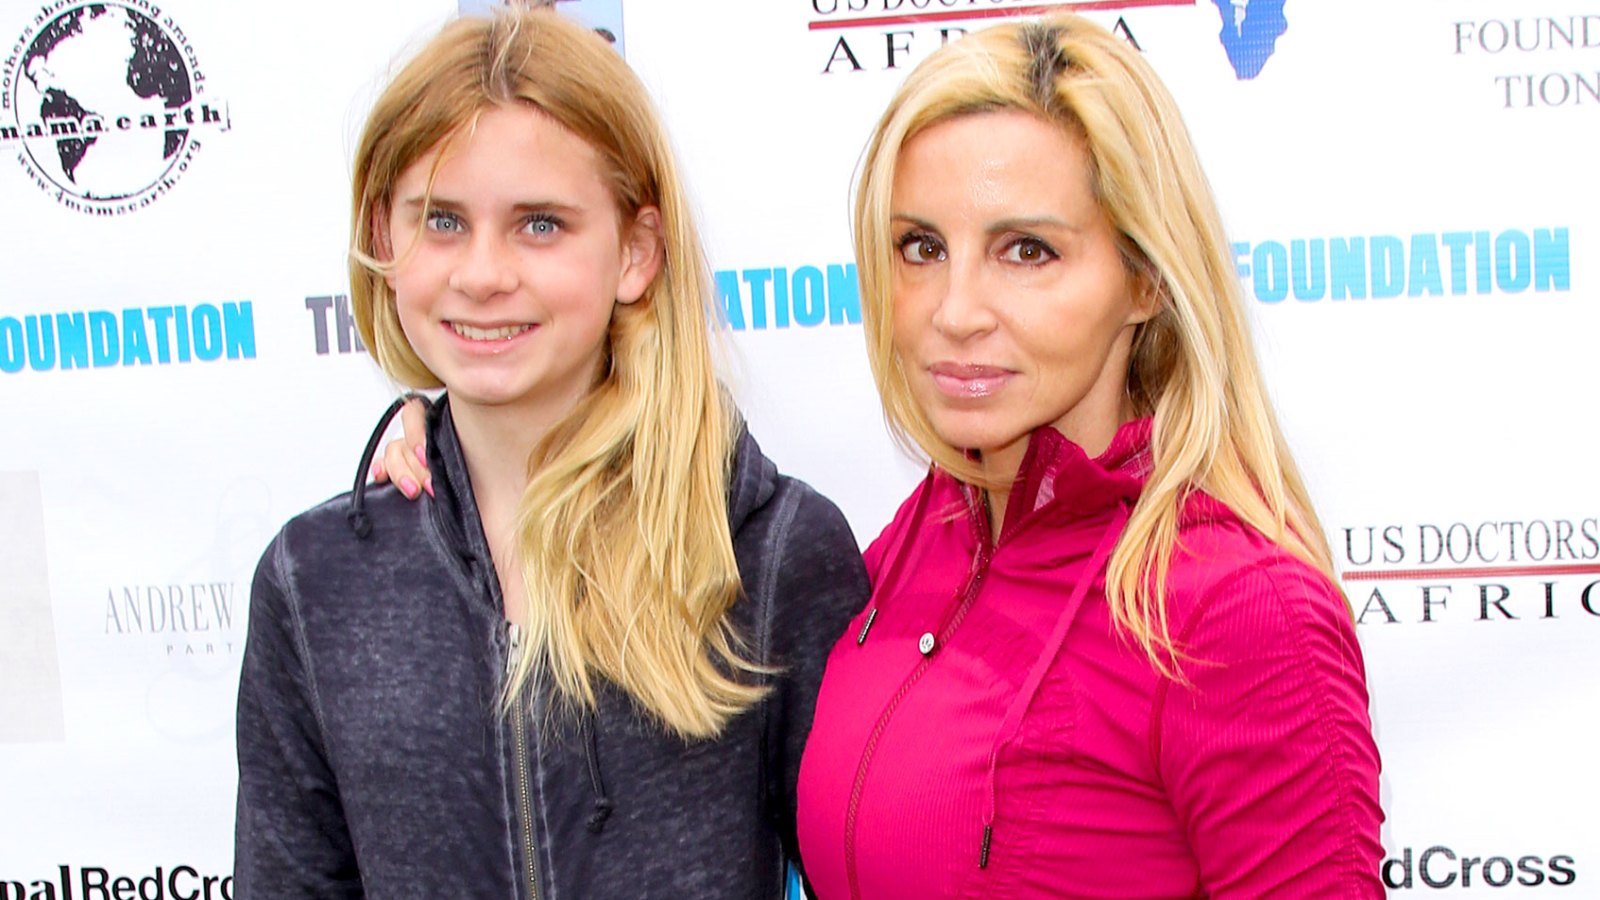 Camille Grammer (R) and her Daughter Mason Grammer (L) attend the Relief Run to raise funds for Nepal victims on May 17, 2015 in Santa Monica, California.